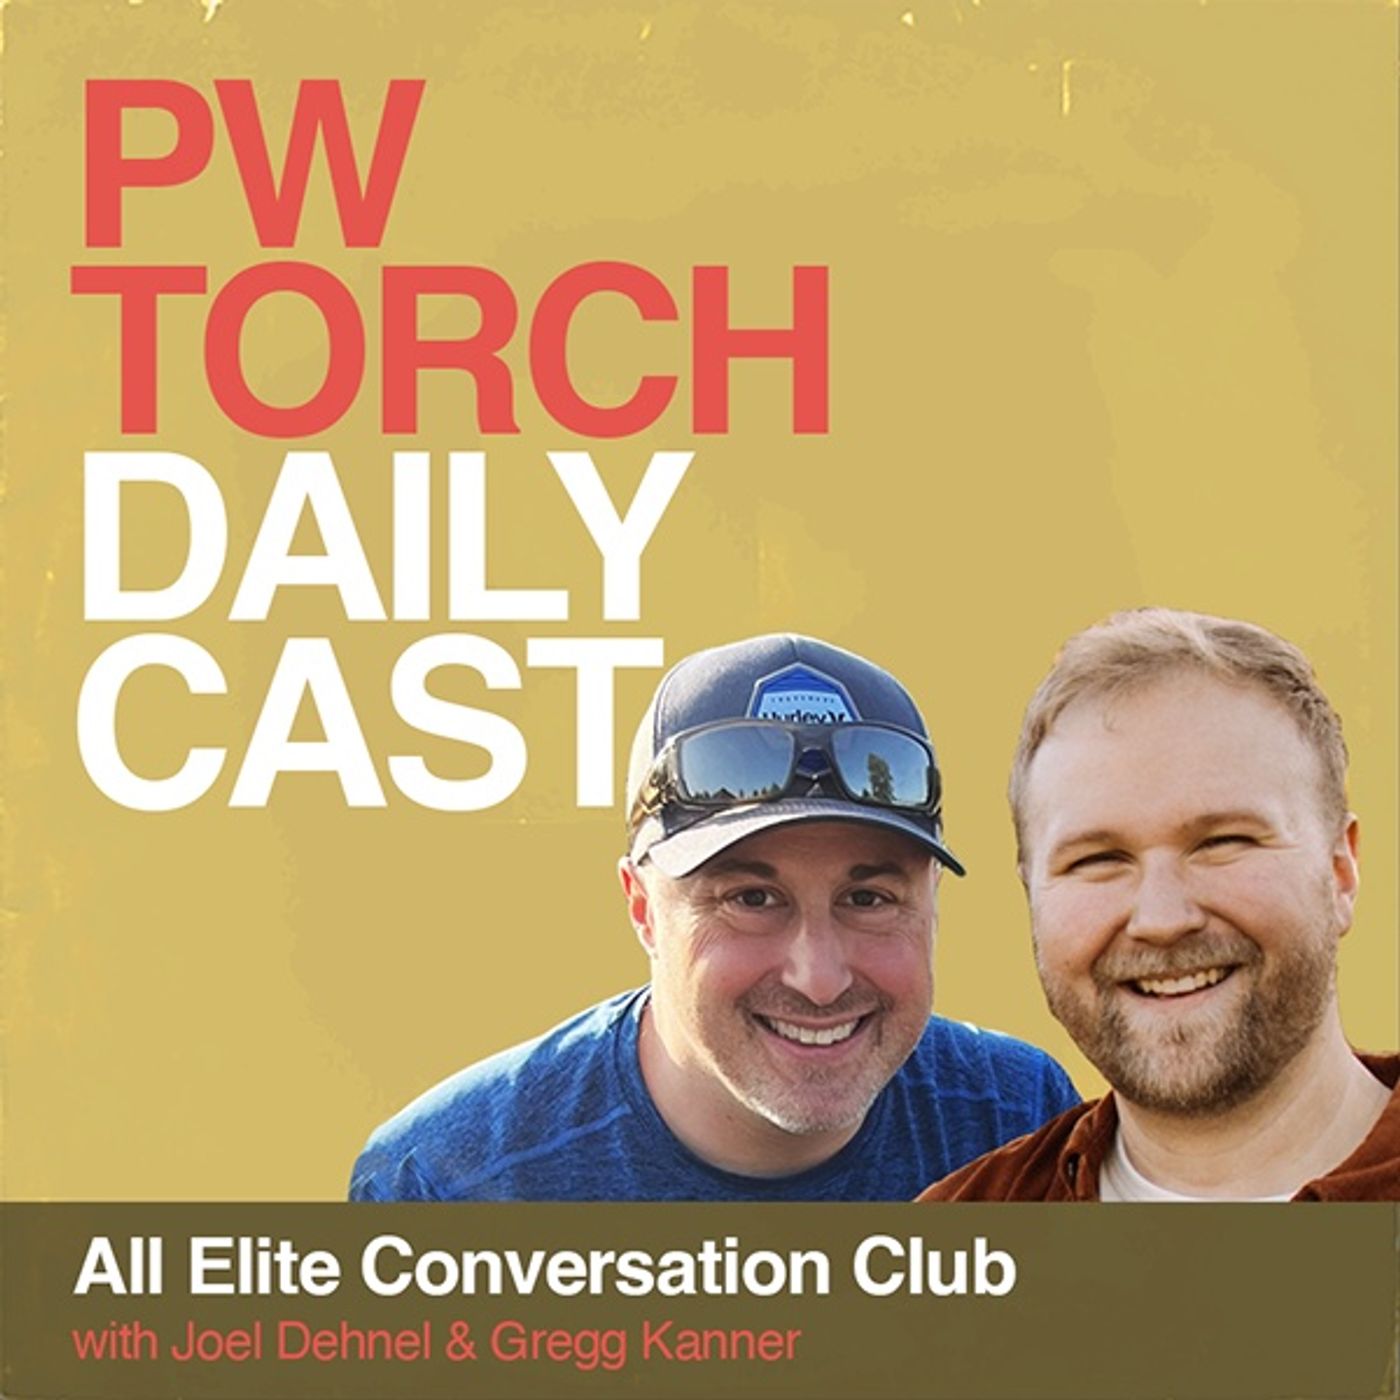 All Elite Conversation Club - Dehnel & Kanner talk the week's AEW TV and build to Revolution, top 20 AEW TV stars and whether heels or faces